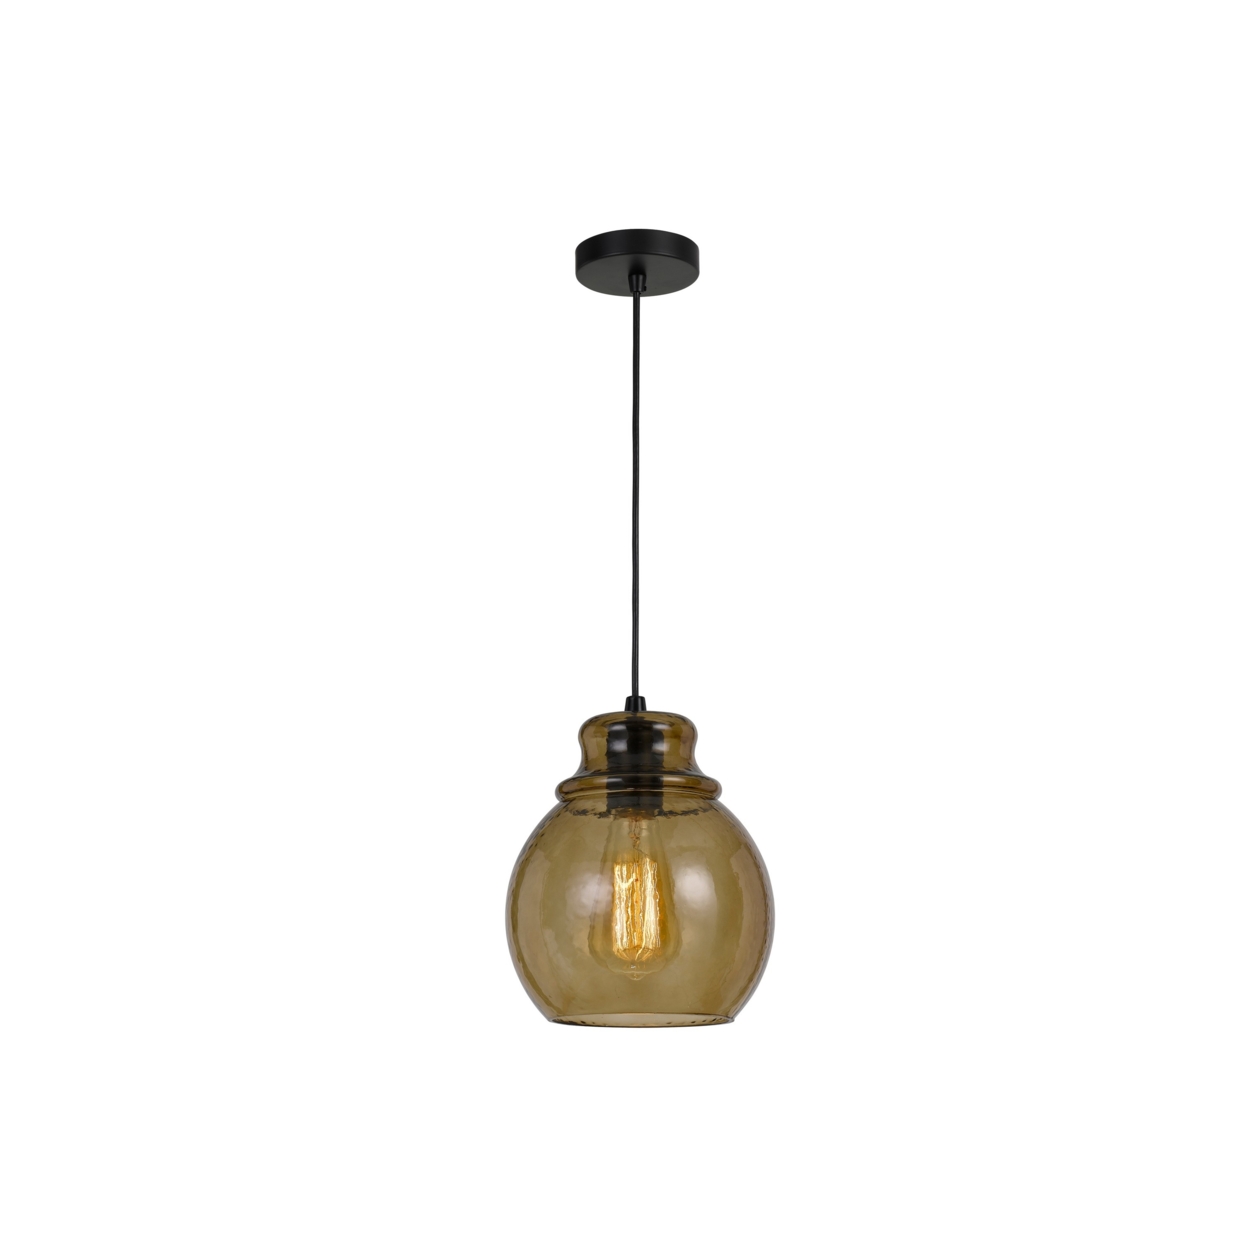 Round Glass Shade Pendant Lighting With Canopy And Hardwired Switch, Brown- Saltoro Sherpi